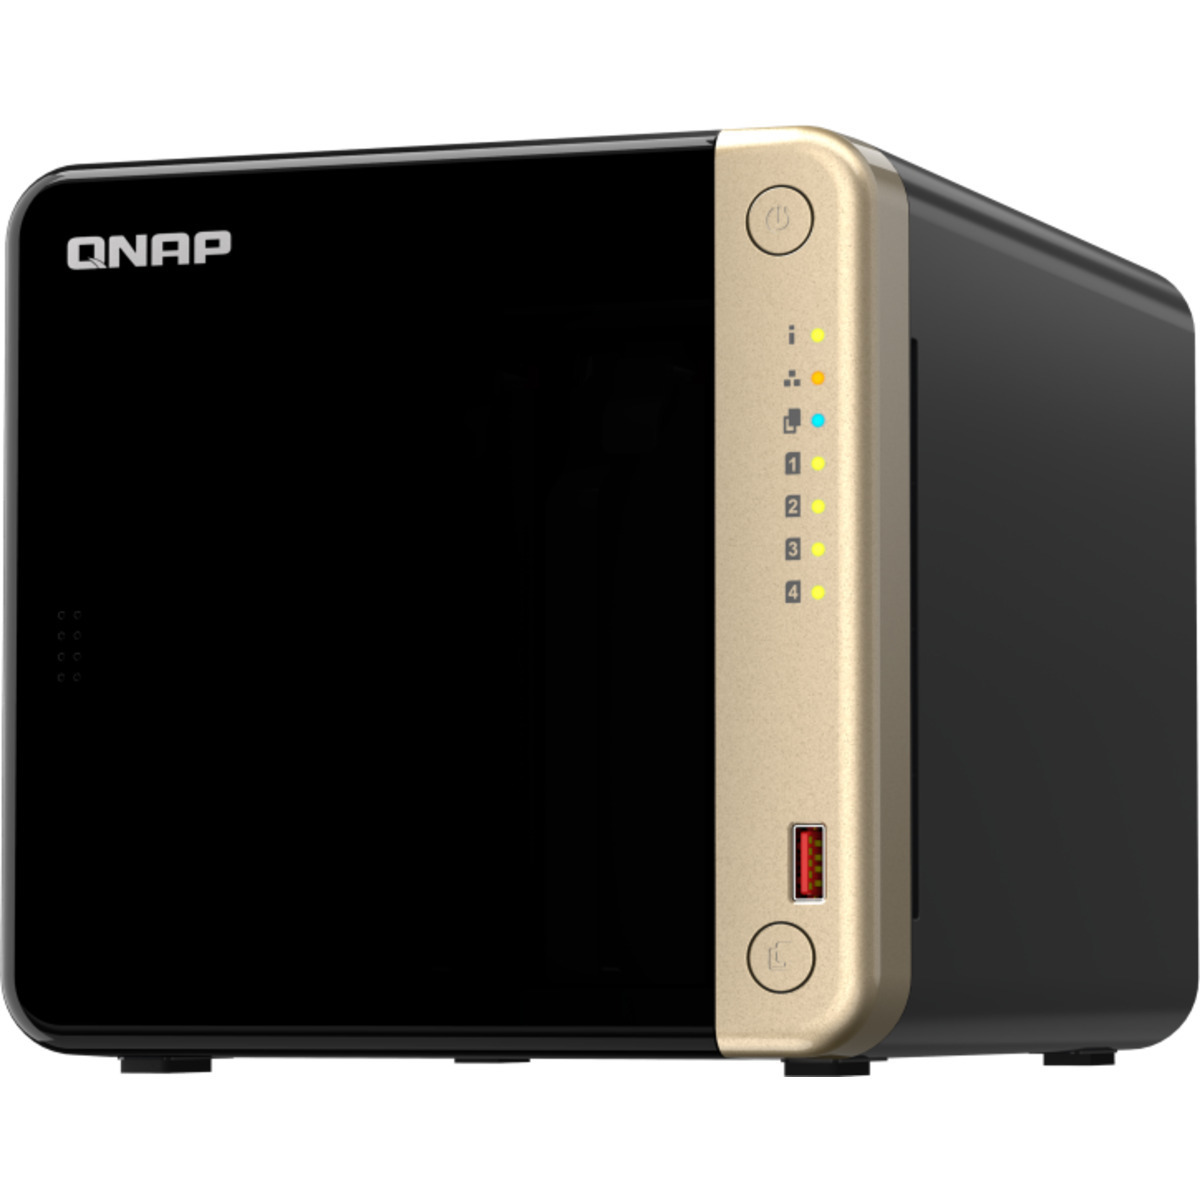 QNAP TS-464 32tb 4-Bay Desktop Multimedia / Power User / Business NAS - Network Attached Storage Device 4x8tb Western Digital Red Plus WD80EFPX 3.5 7200rpm SATA 6Gb/s HDD NAS Class Drives Installed - Burn-In Tested TS-464